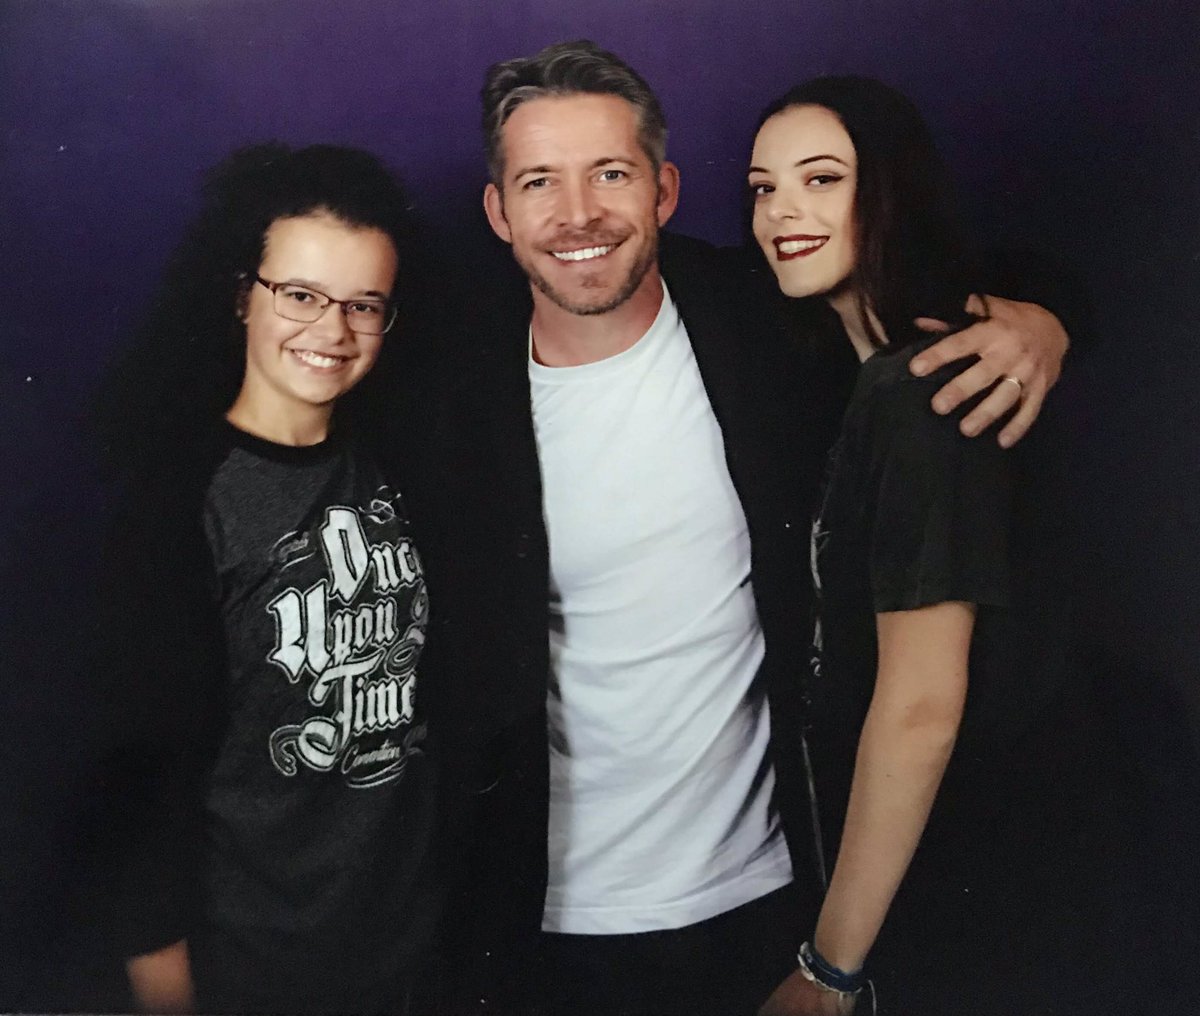 Next  @Sean_m_maguire photo is one of my favorite photos because it turned out so good  I’m so happy I was able to share a photo with  @poeticparriIIa. Thanks  @livelaughbade for letting us have your extra Sean photo :)